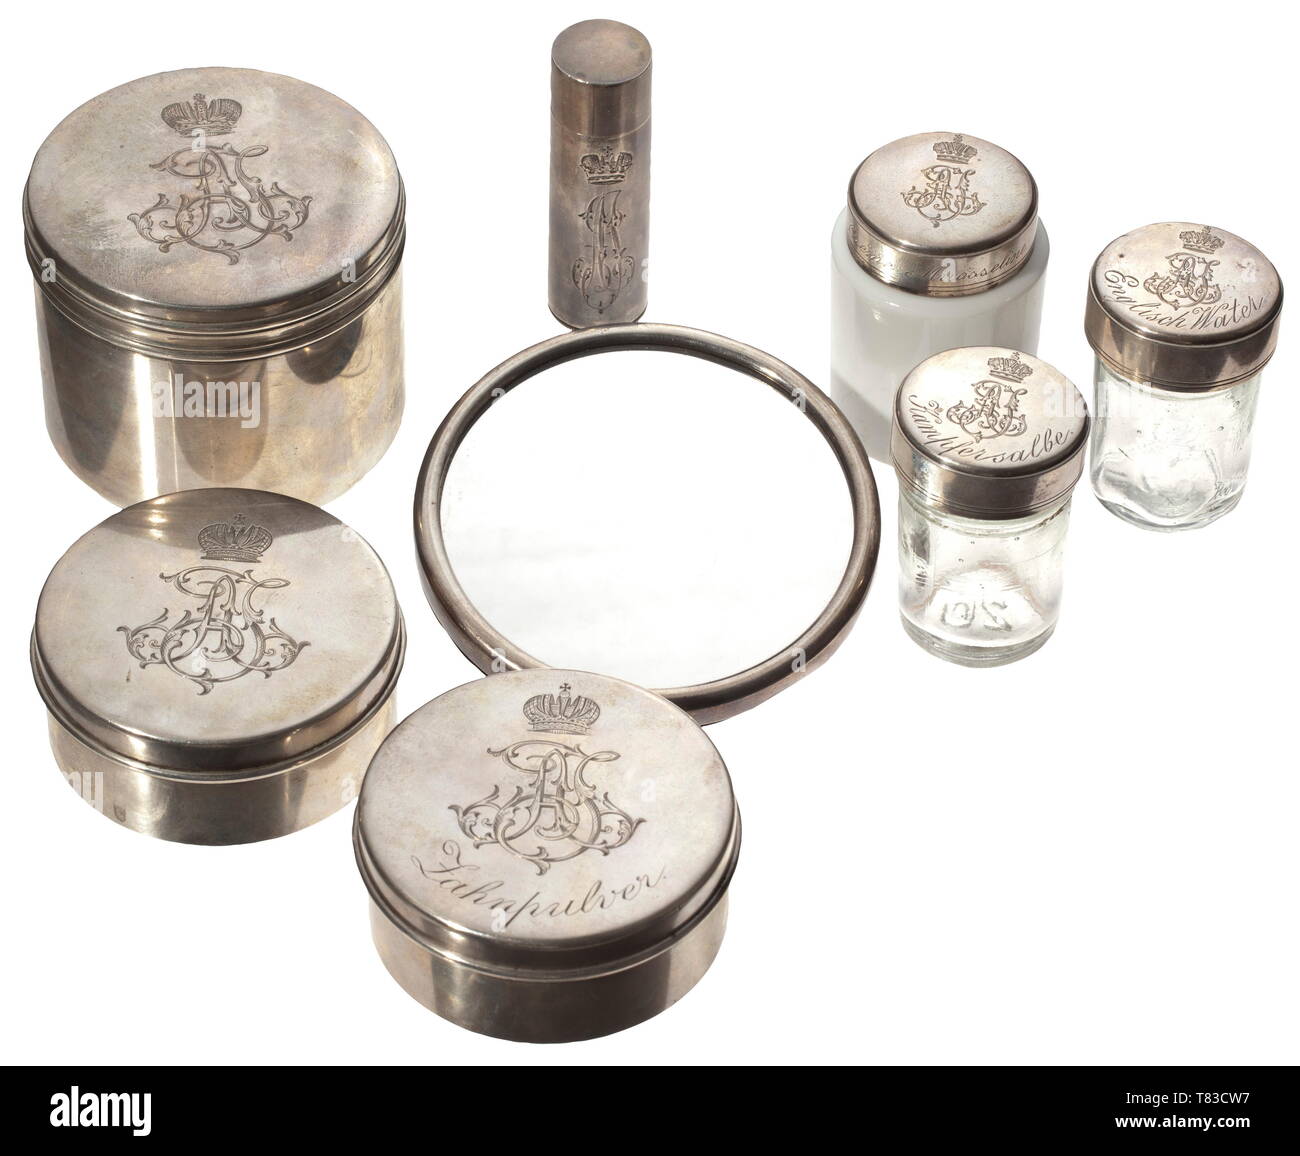 Grand Duchess Alexandra Josipovna (1830 - 1911) - an eight-piece travel toilet-set Court jewellers Grachev Brothers, St. Petersburg, after 1892. Silver, the insides gilt, porcelain and glass. All silver pieces engraved with the monogram 'AJ' surmounted by the grand ducal crown. Cyrillic manufacturer´s marks (two pieces punched with 'OM'), marks with the double-headed eagle and St. Petersburg marks of 19th century, Additional-Rights-Clearance-Info-Not-Available Stock Photo